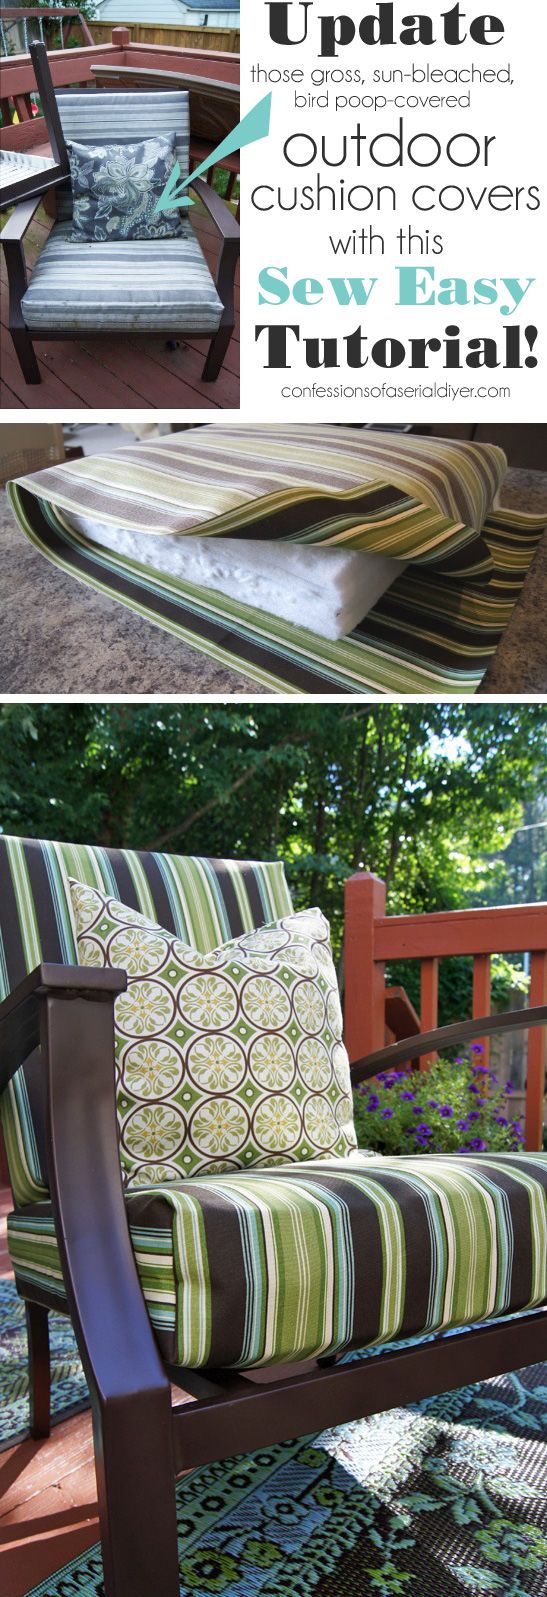 Sew Easy Outdoor Cushion Covers   (Part 1)